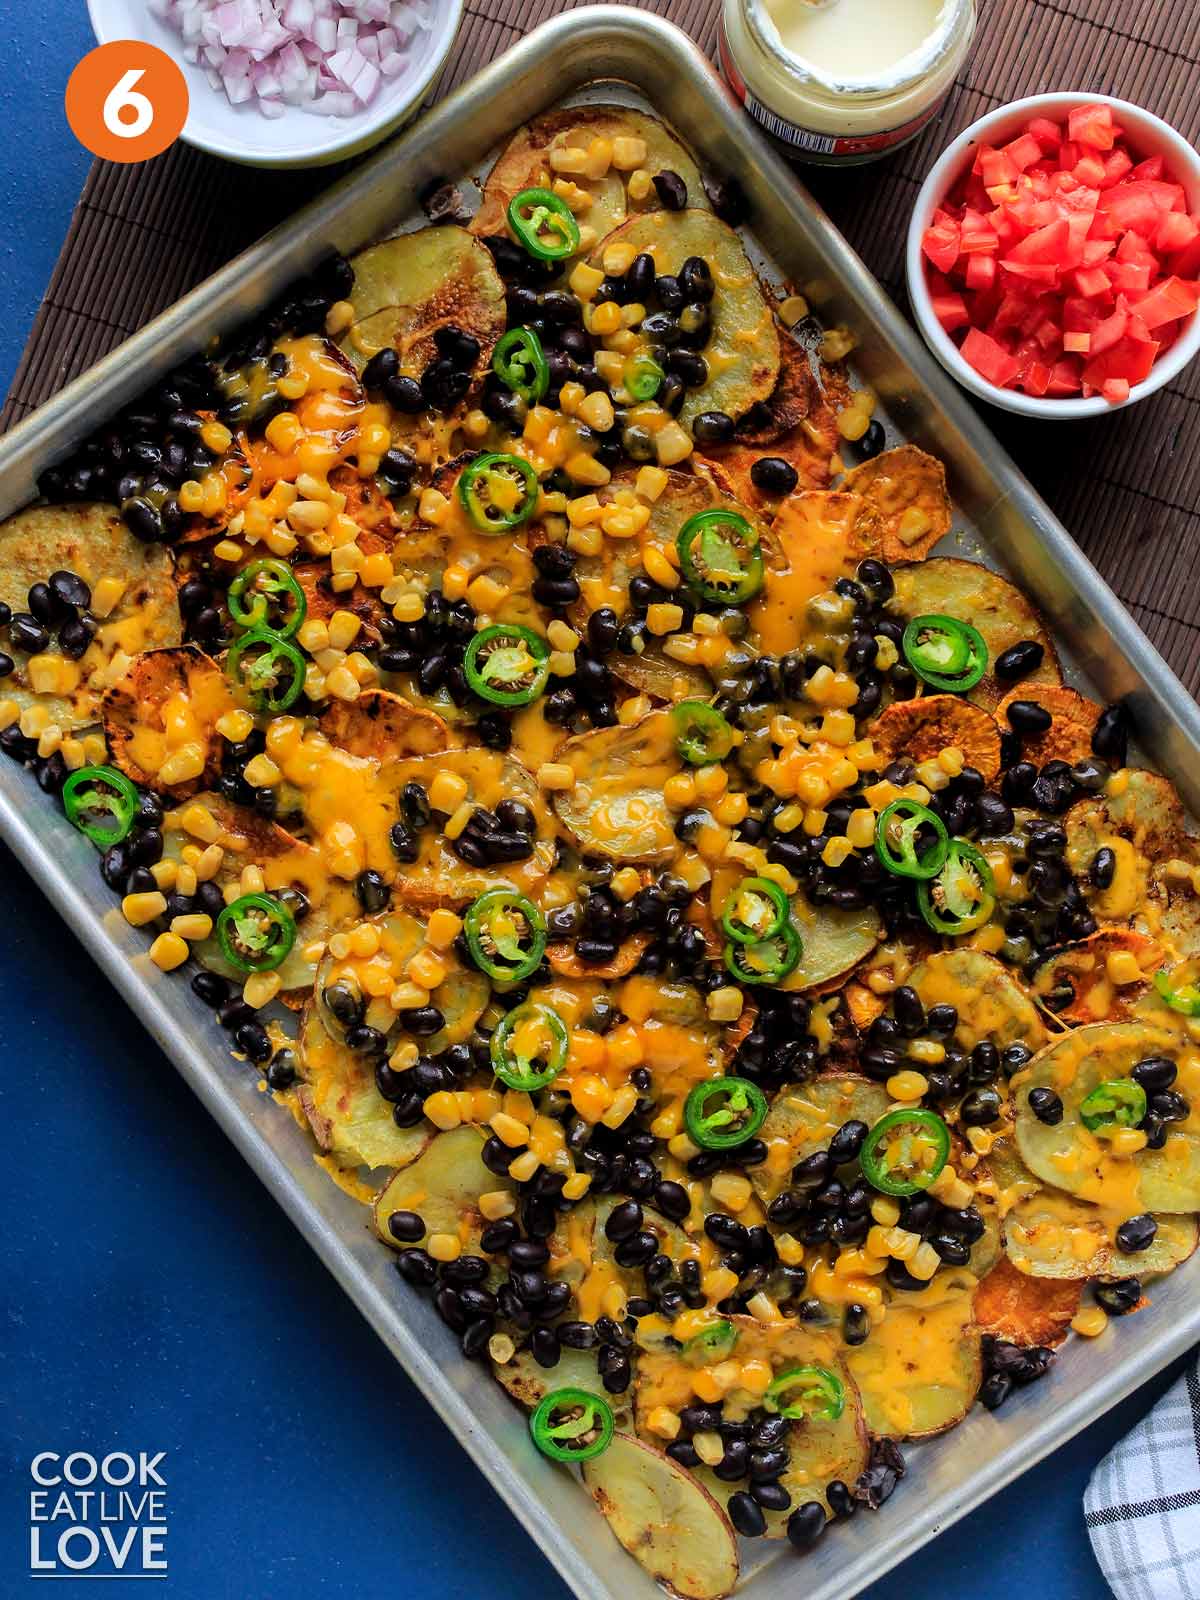 The rest of toppings are added to cooked veggie loaded nachos.